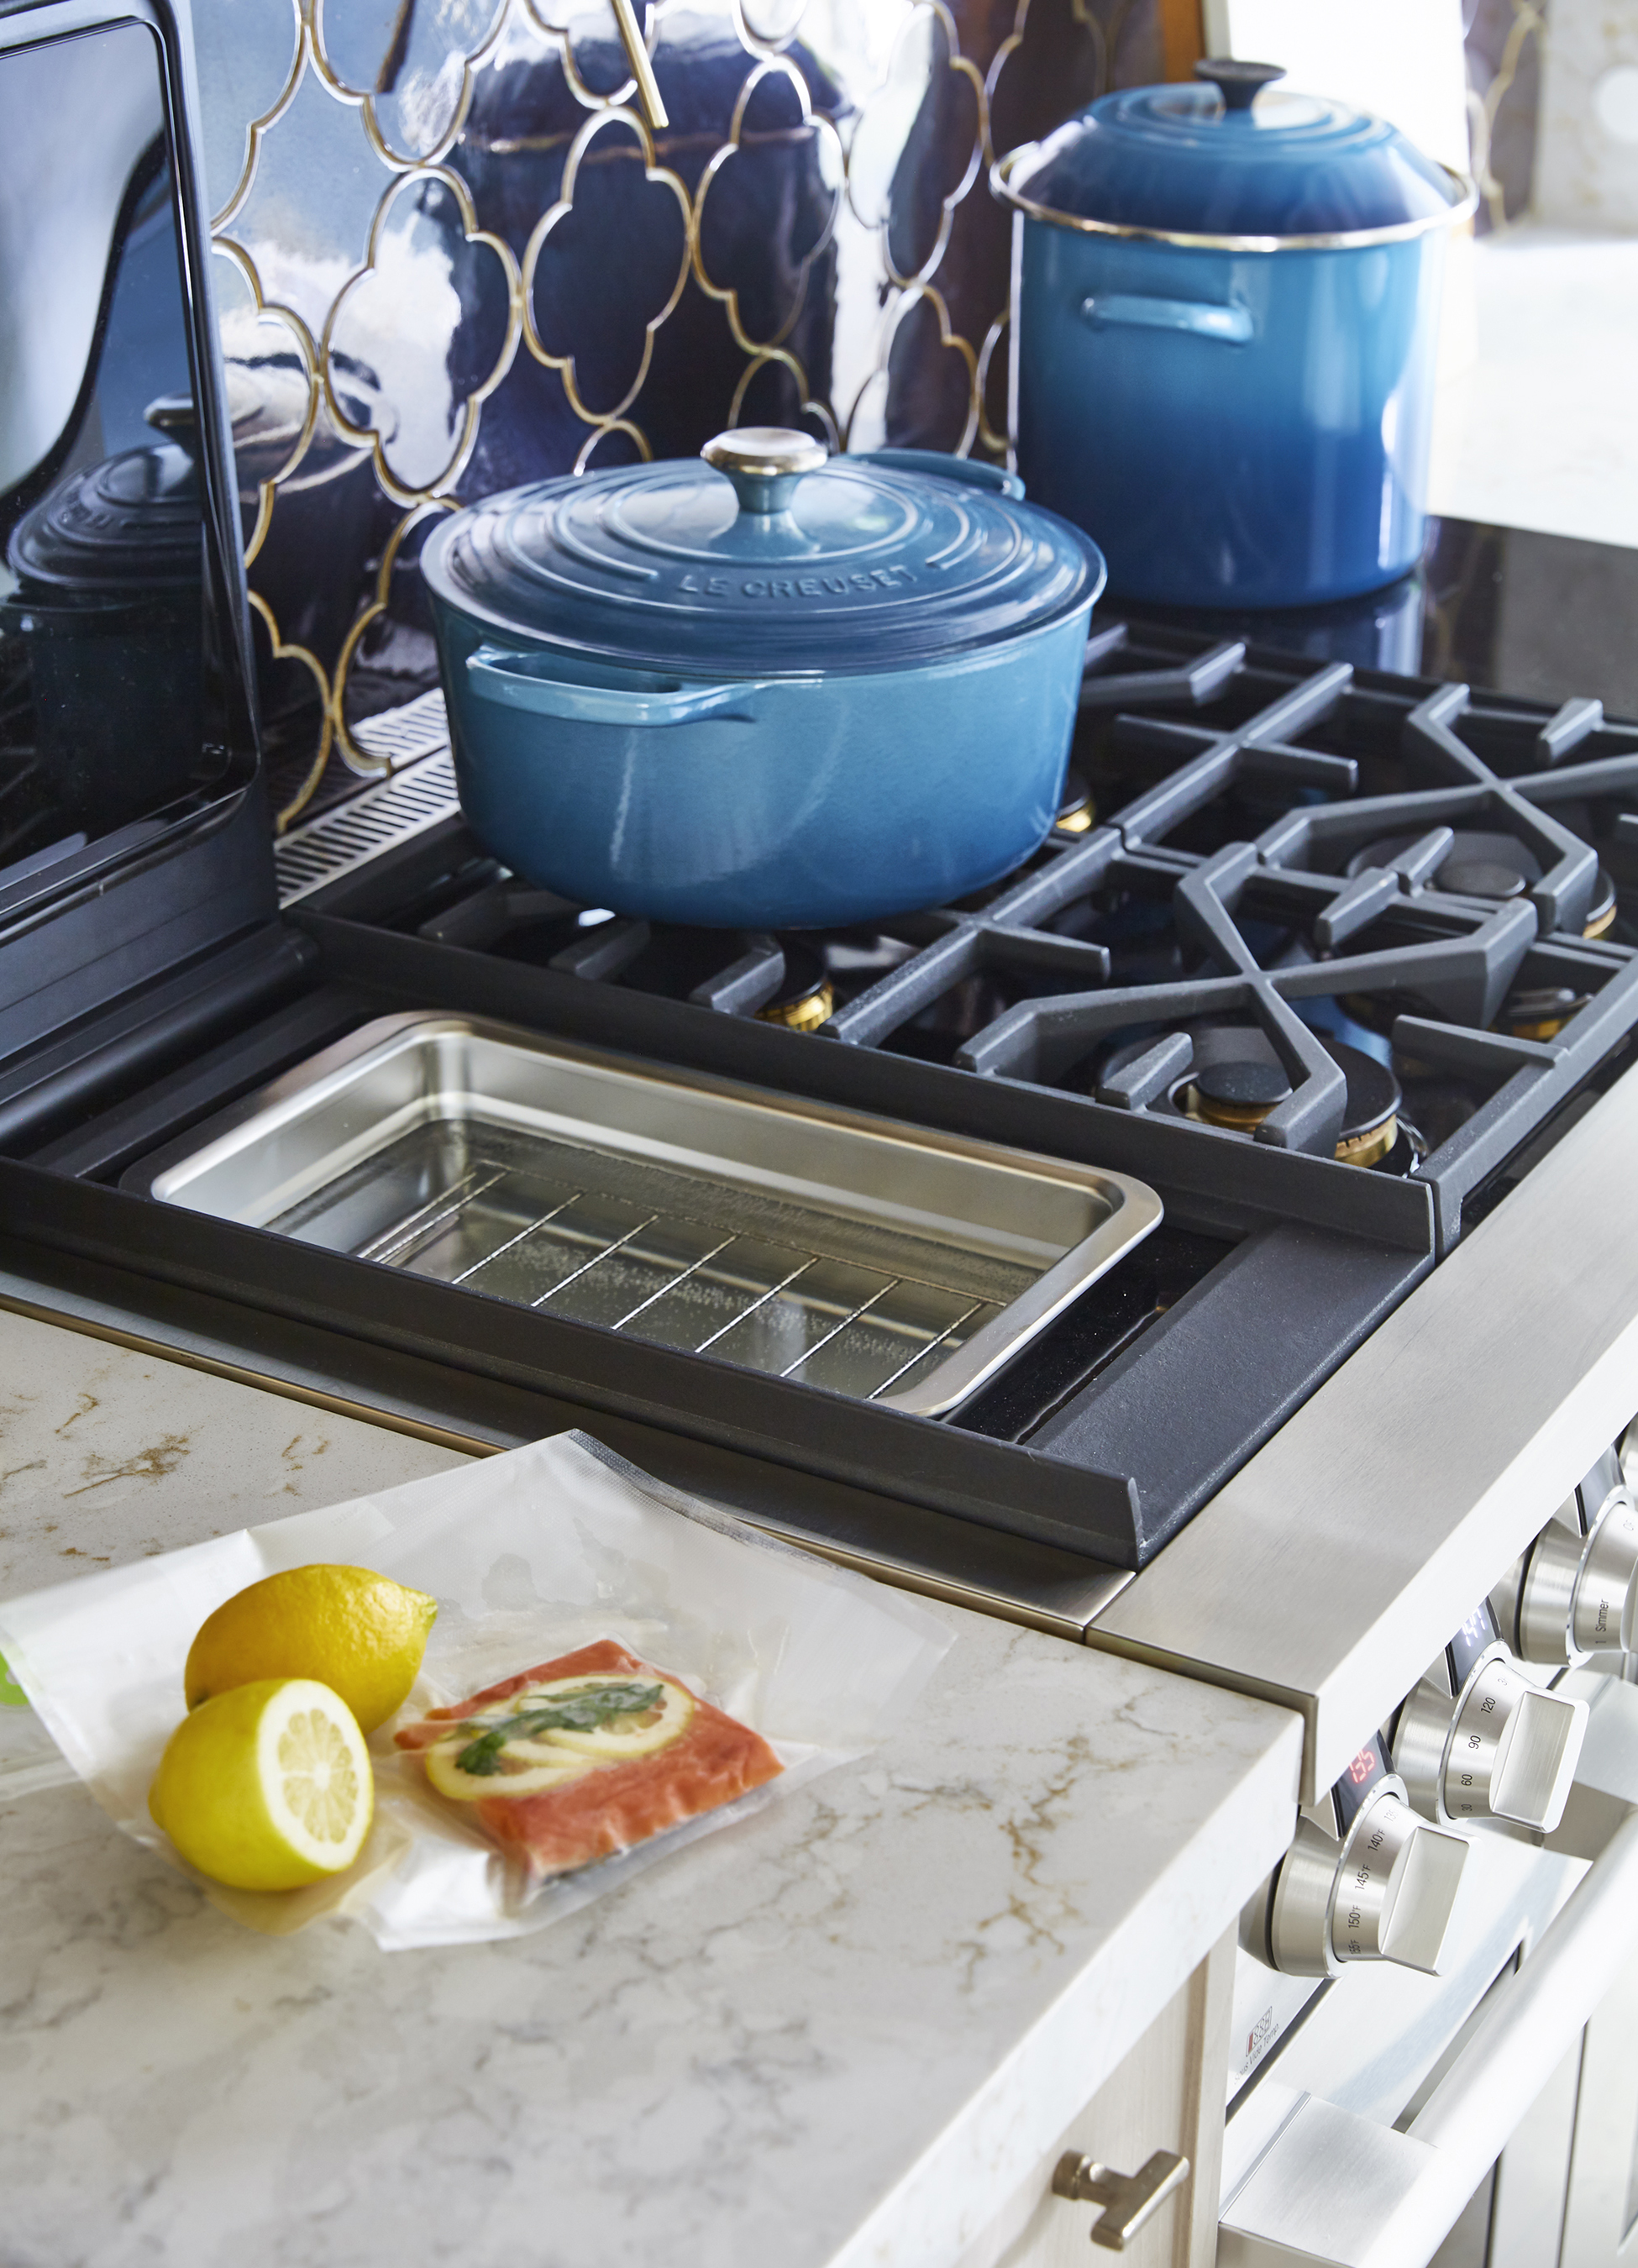 The brand’s new pro rangetops are the industry's first dual-fuel cooktops with built-in sous vide modality, allowing home chefs to achieve gourmet results in their own kitchens.